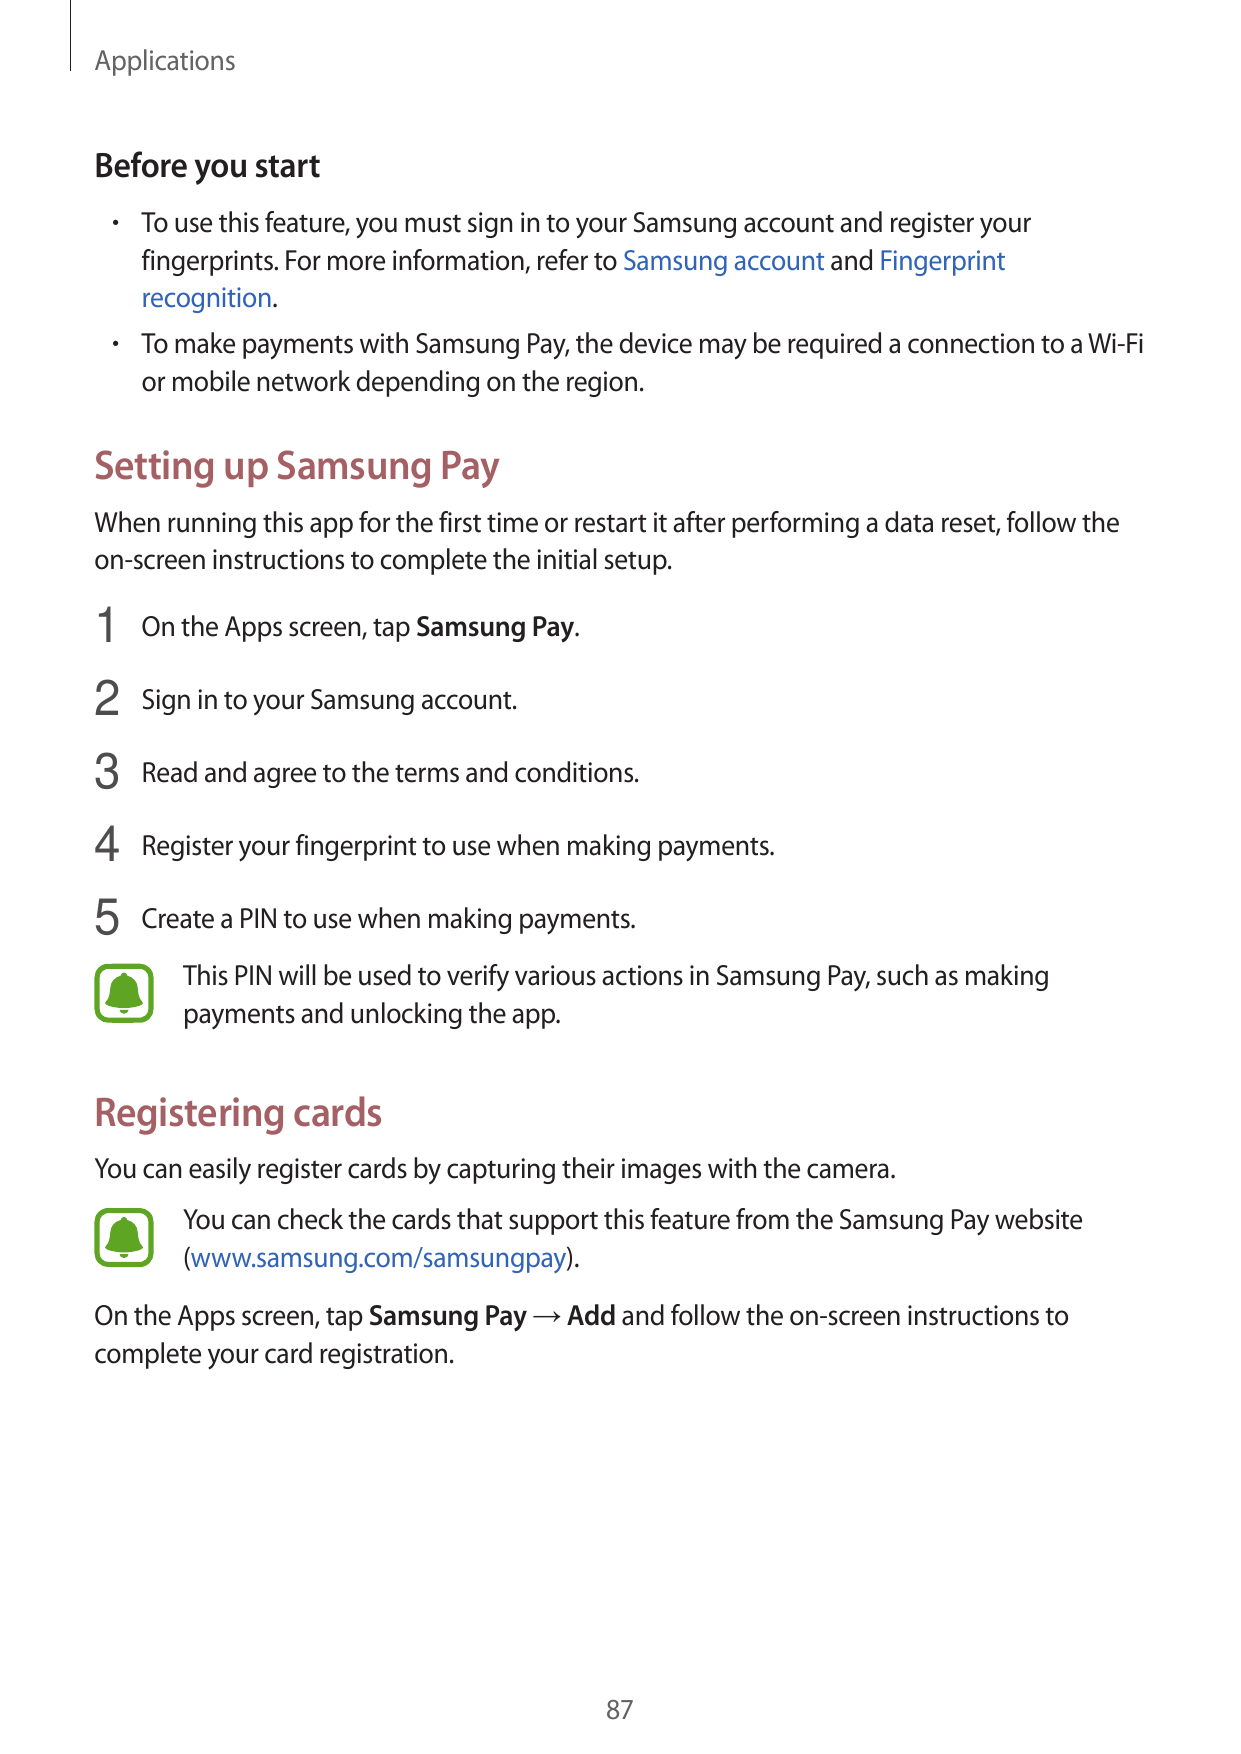 ApplicationsBefore you start• To use this feature, you must sign in to your Samsung account and register yourfingerprints. For m